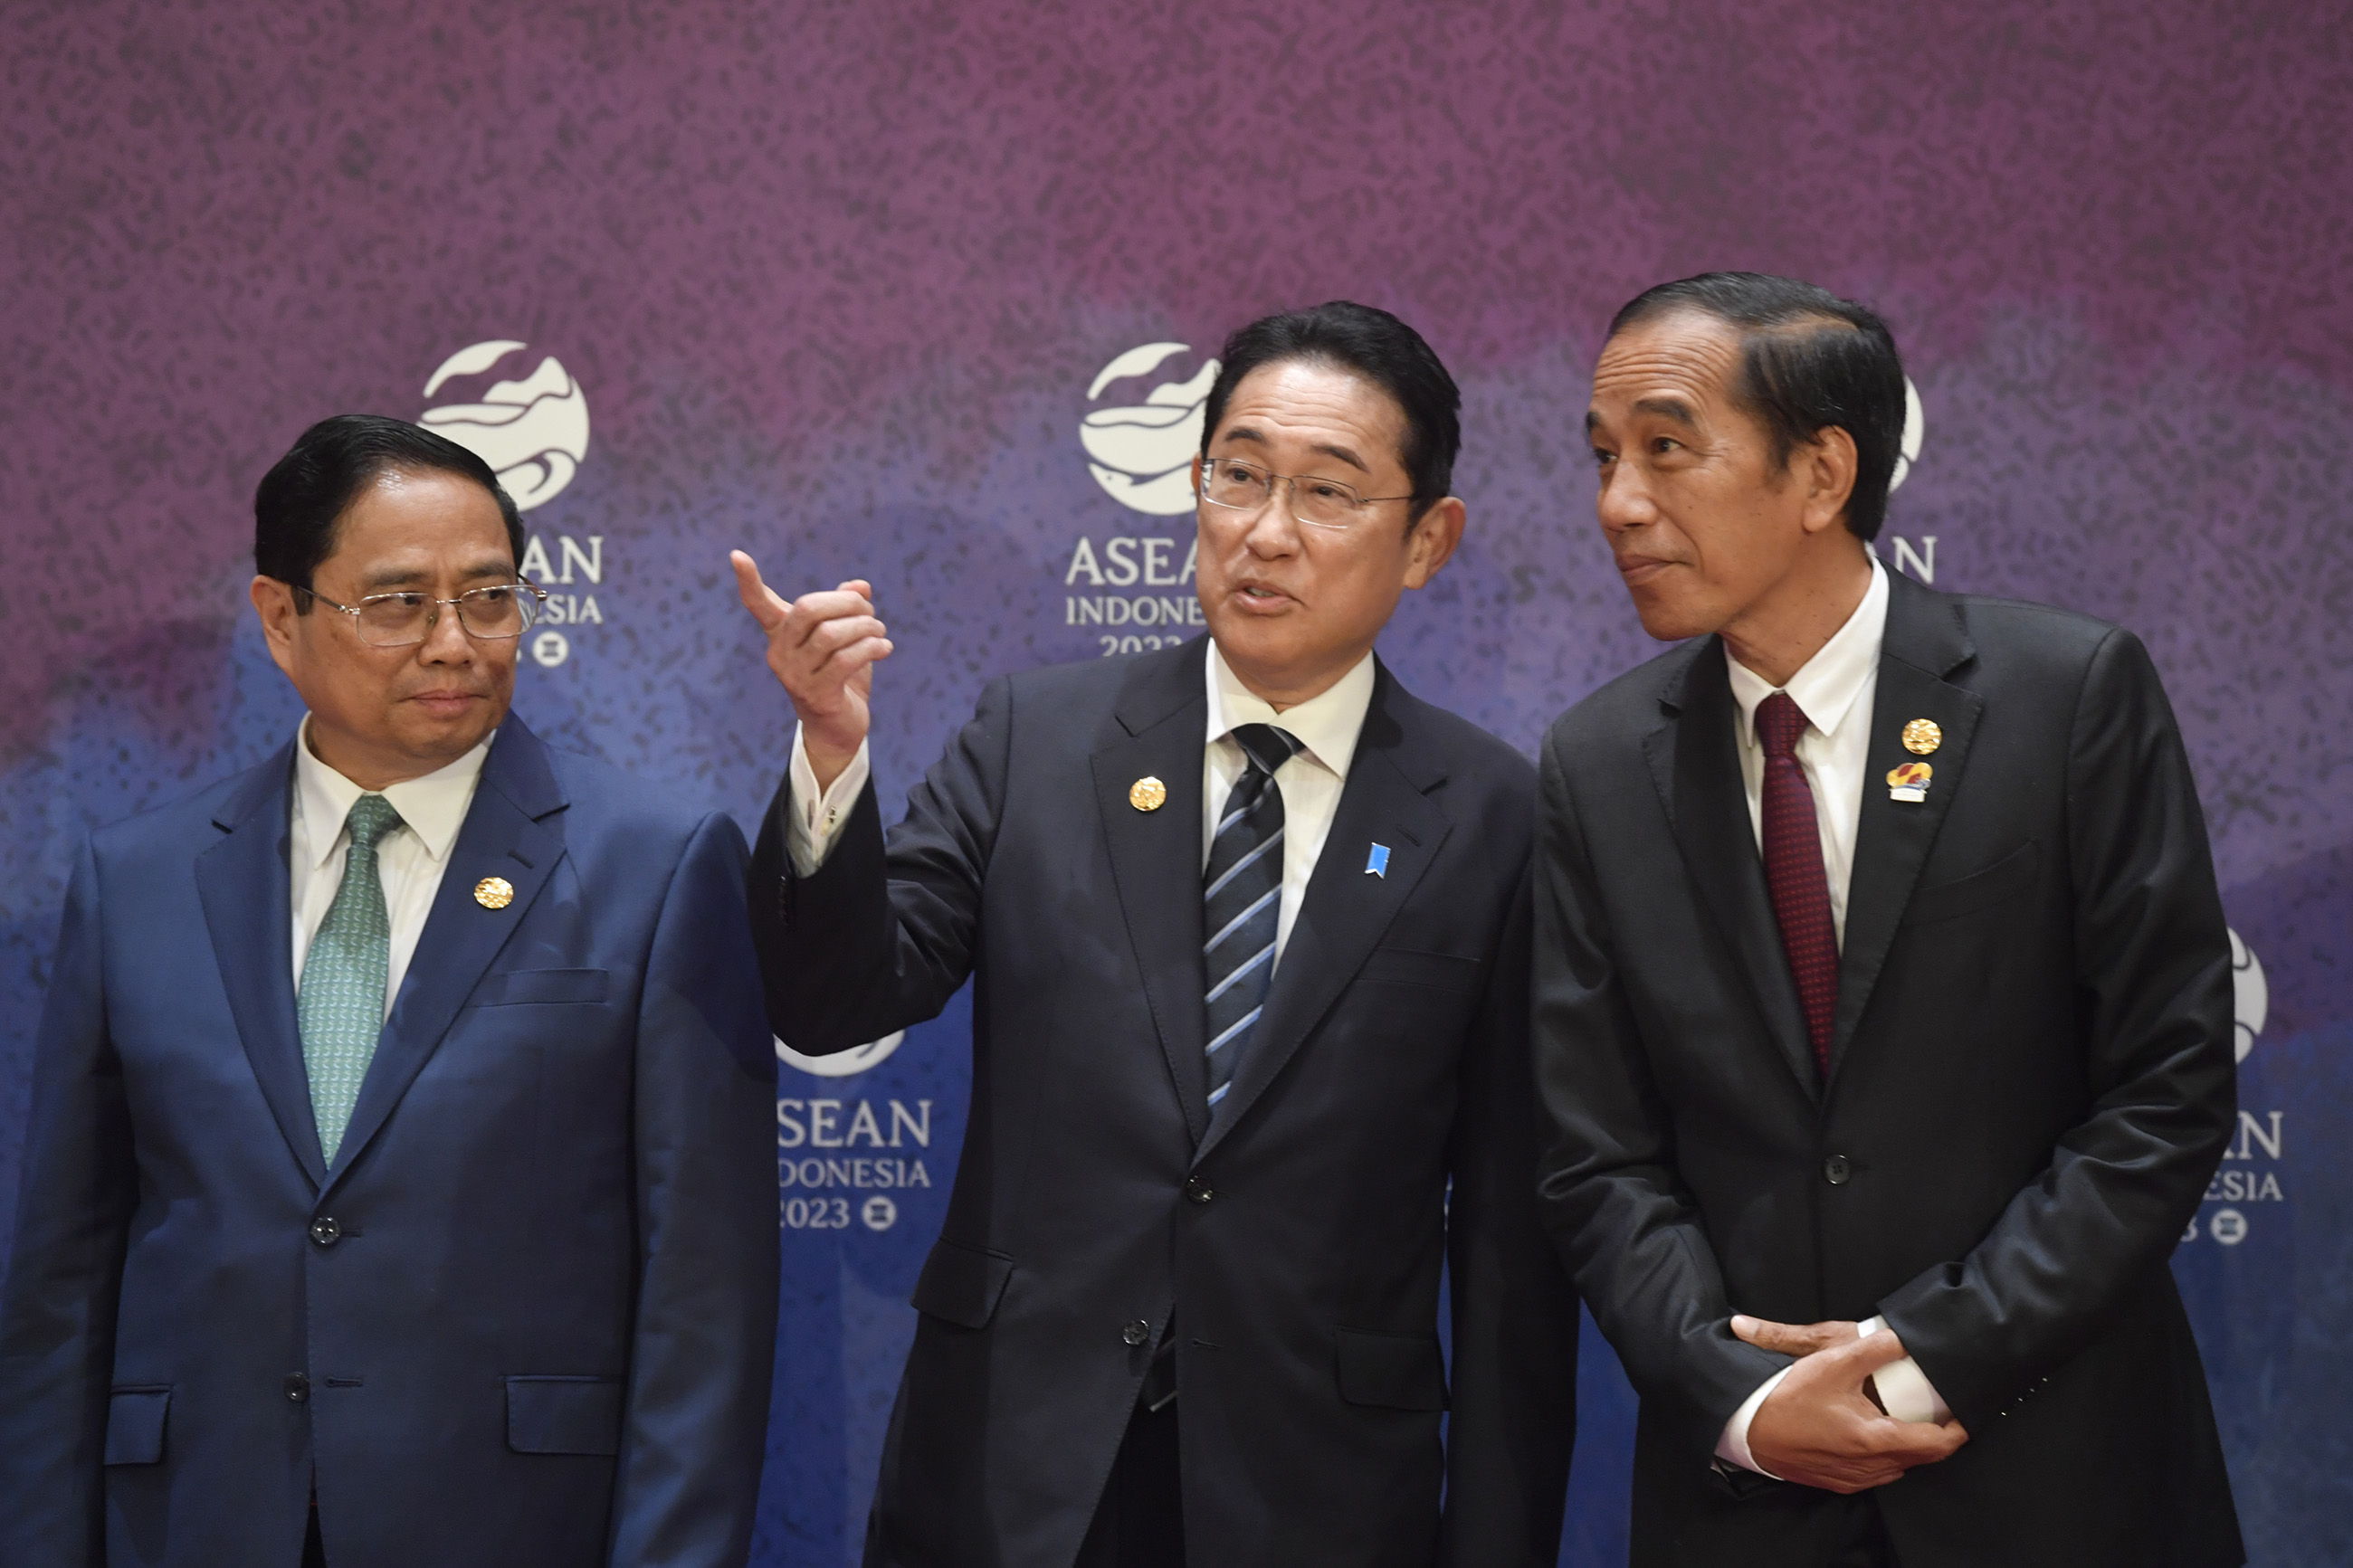 Photo session with ASEAN leaders 2 (Photo: ASEAN Official)